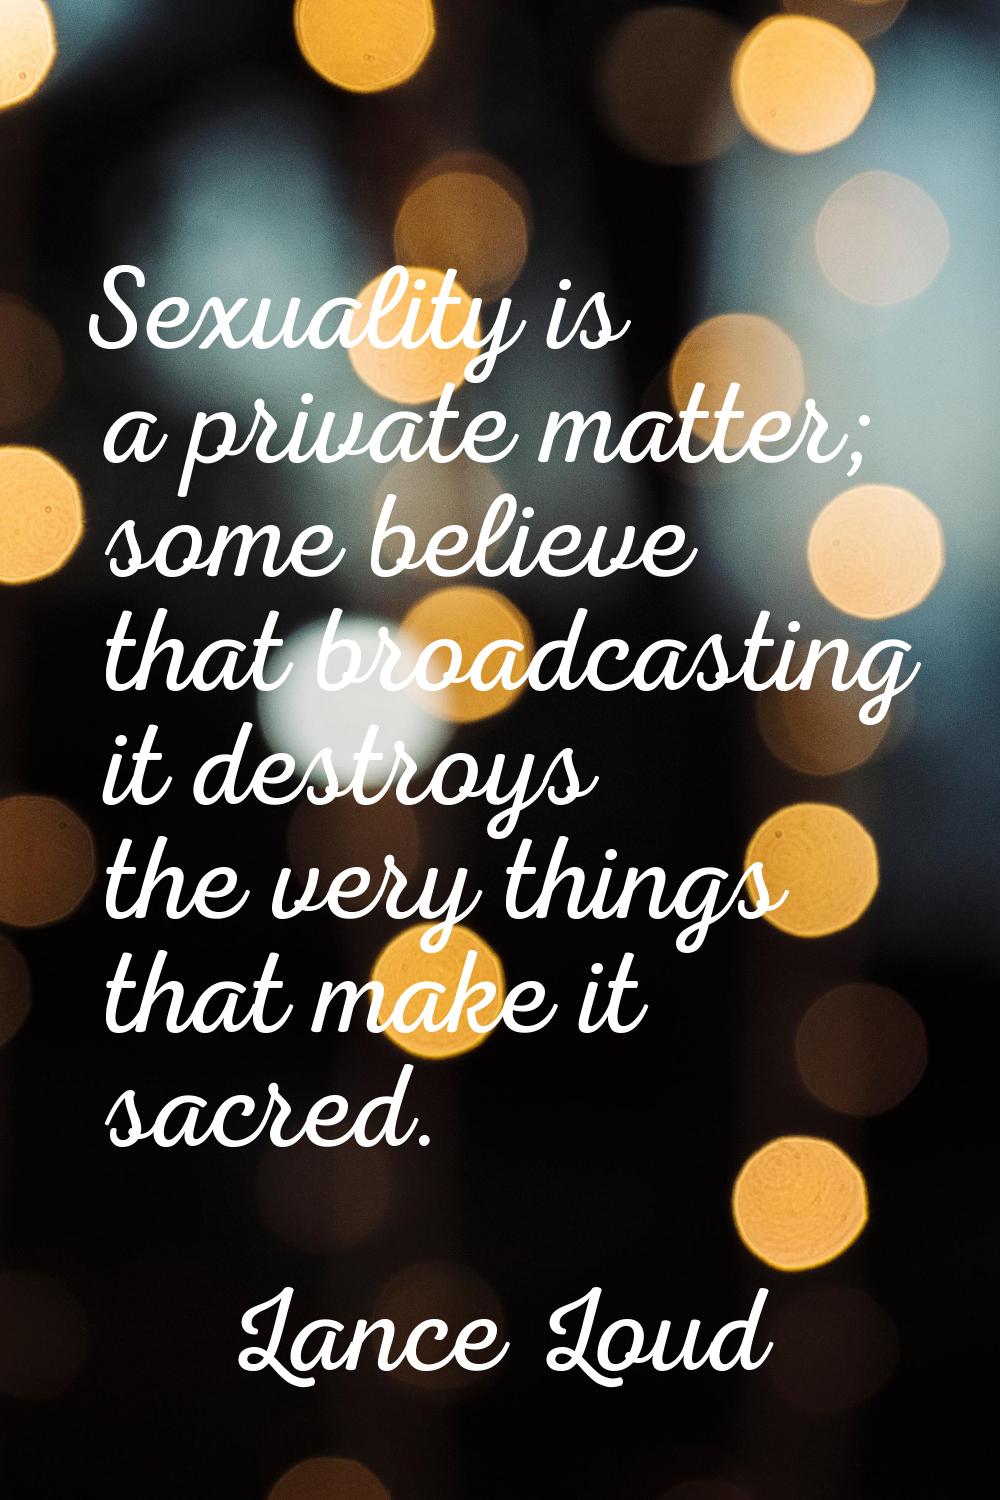 Sexuality is a private matter; some believe that broadcasting it destroys the very things that make